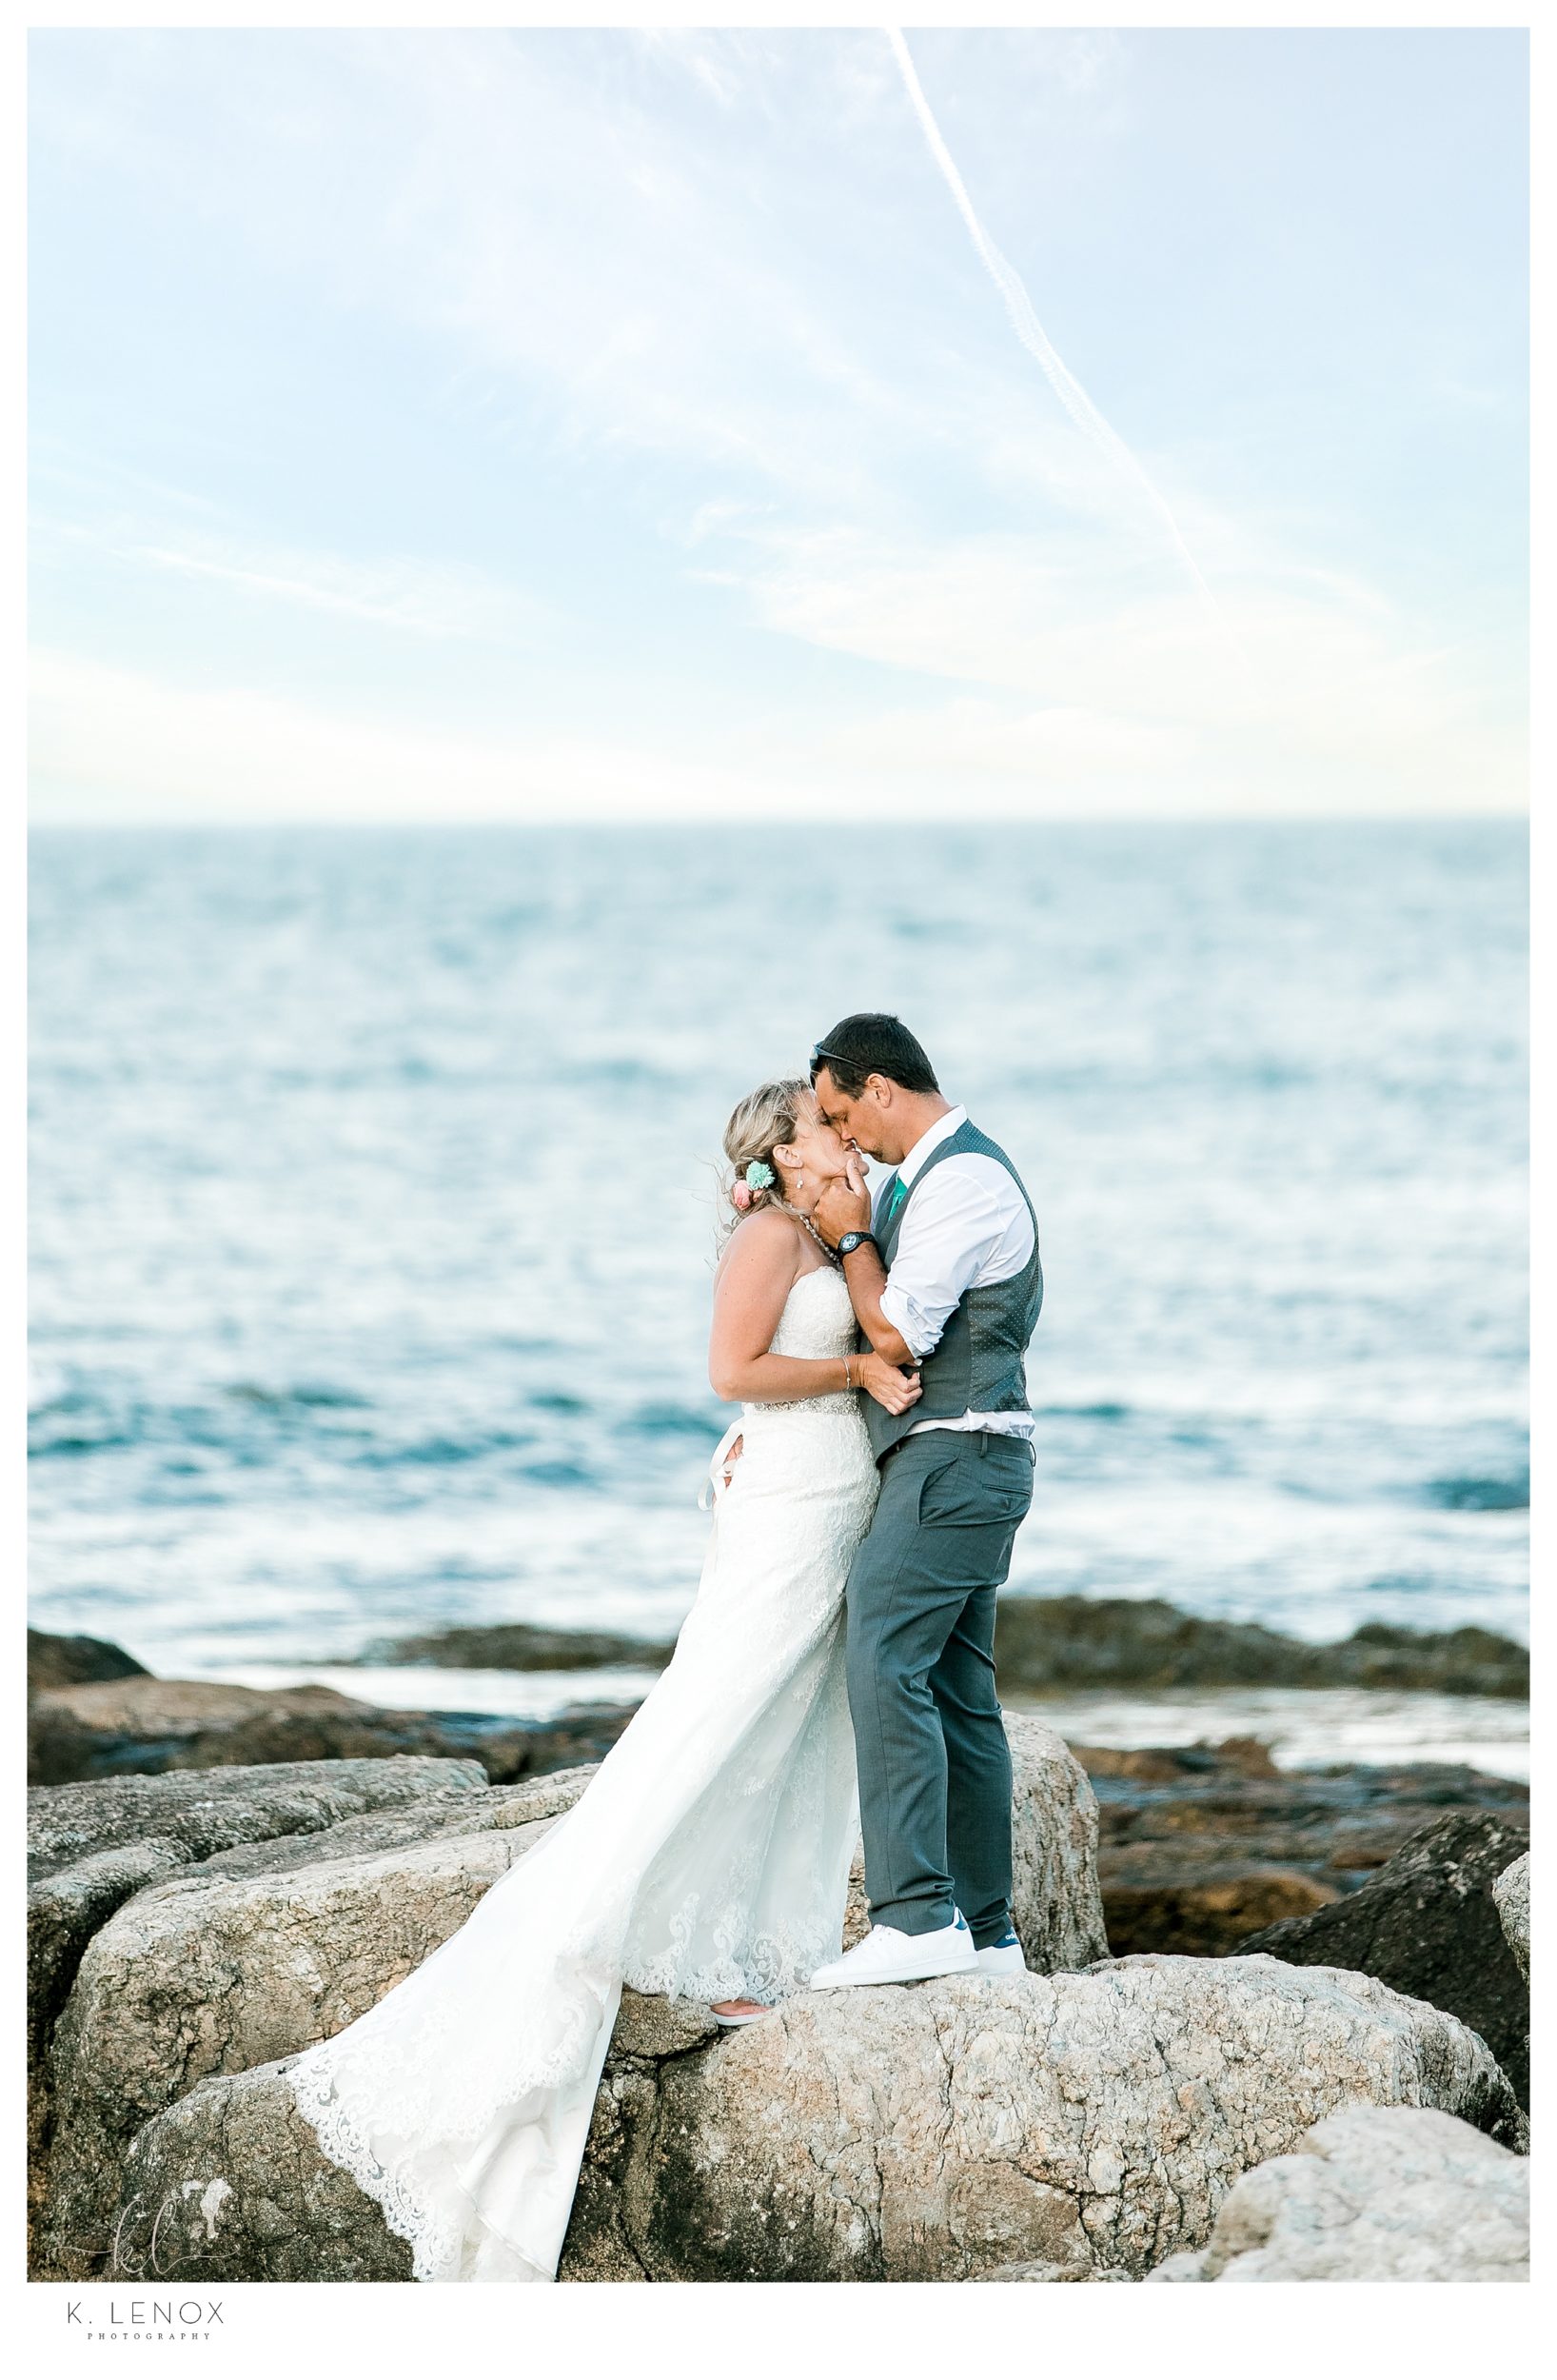 Romantic photo of a bride and groom kissing on the rocks overlooking the ocean after their seacoast wedding